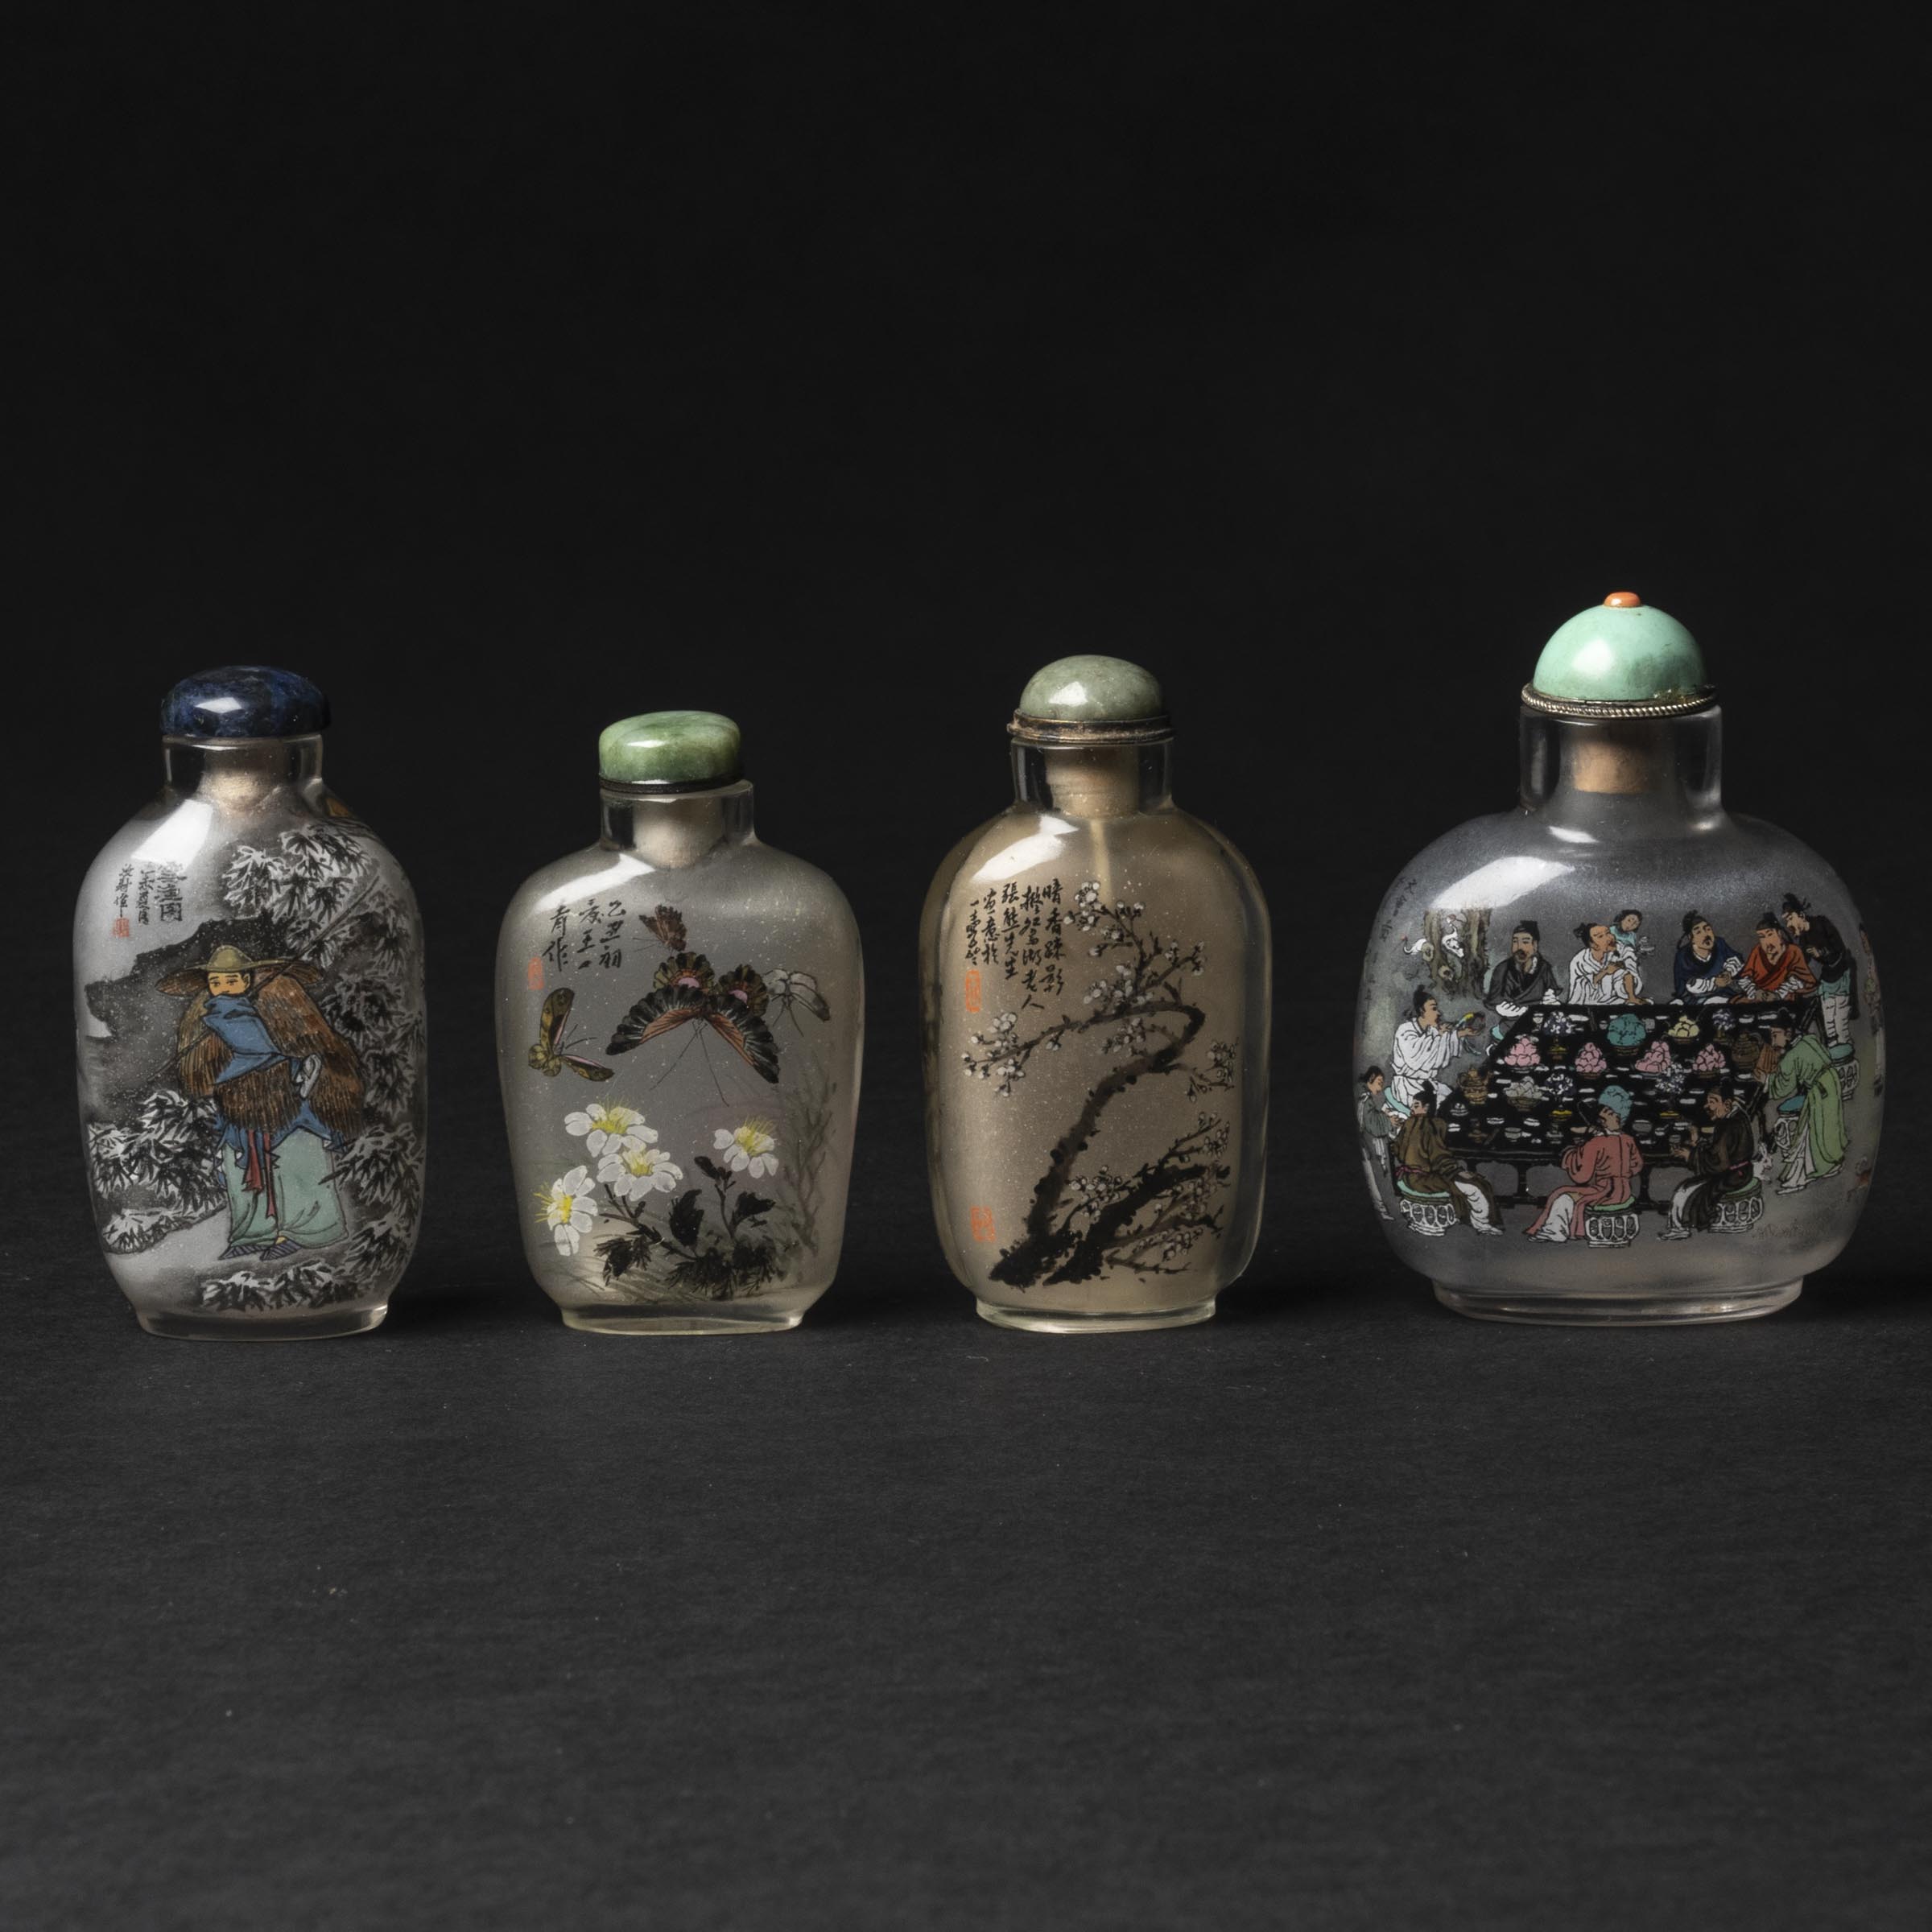 A Group of Four Inside-Painted Glass Snuff Bottles, 20th Century